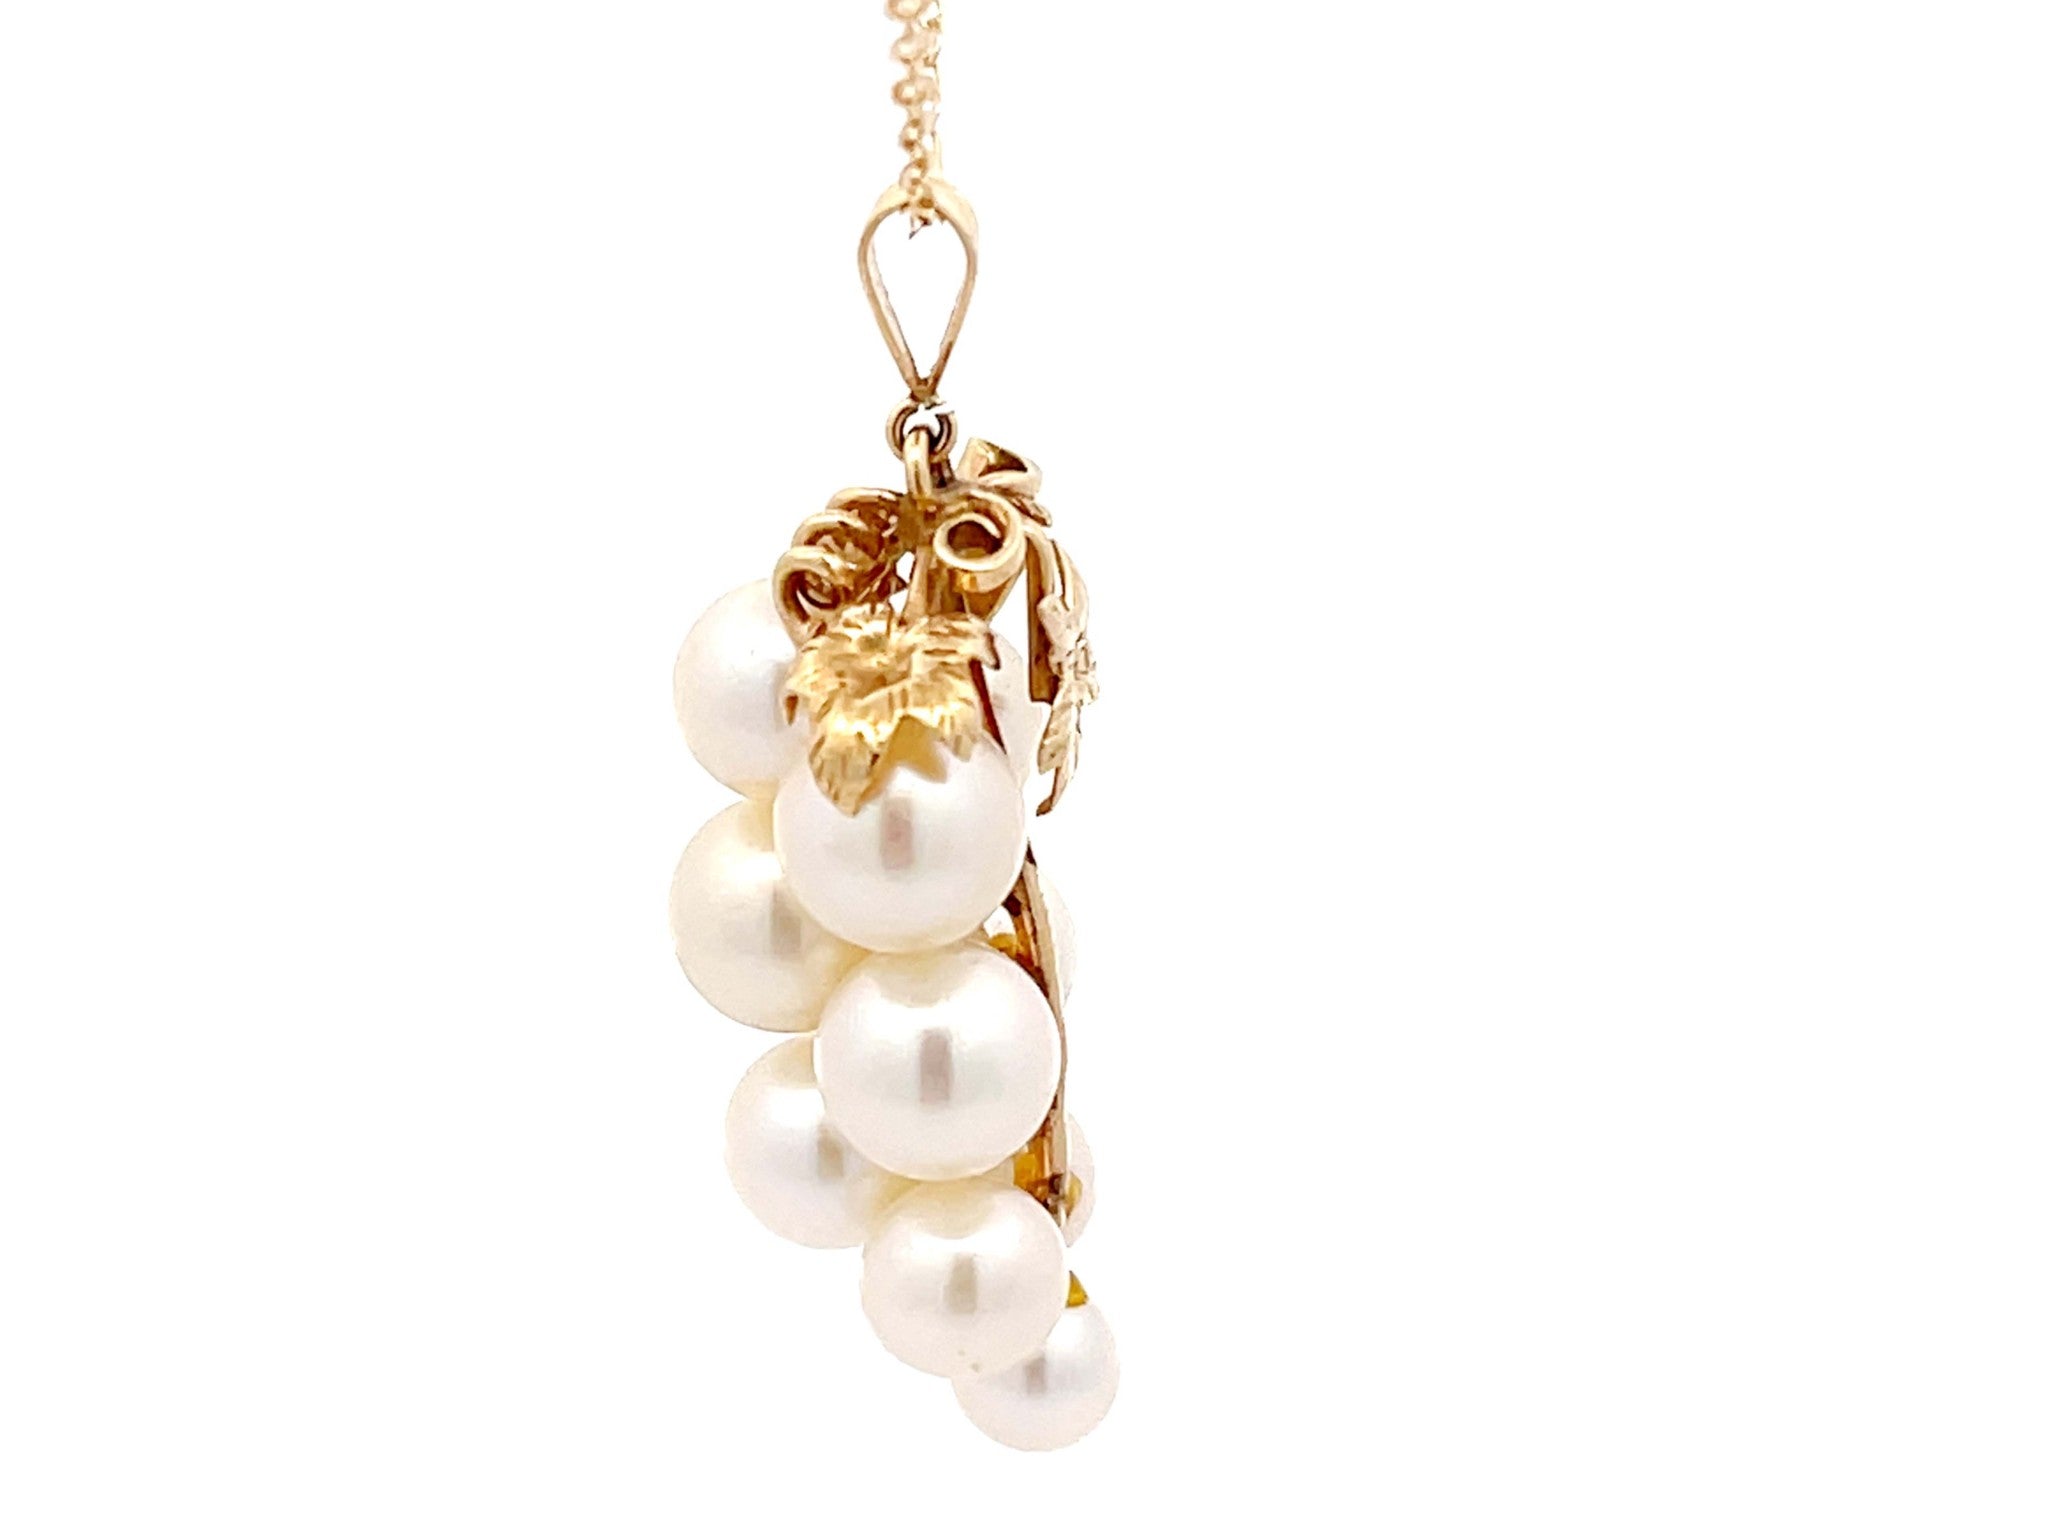 Mings Hawaii Pearl and Leaf Pendant in 14k Yellow Gold with Chain